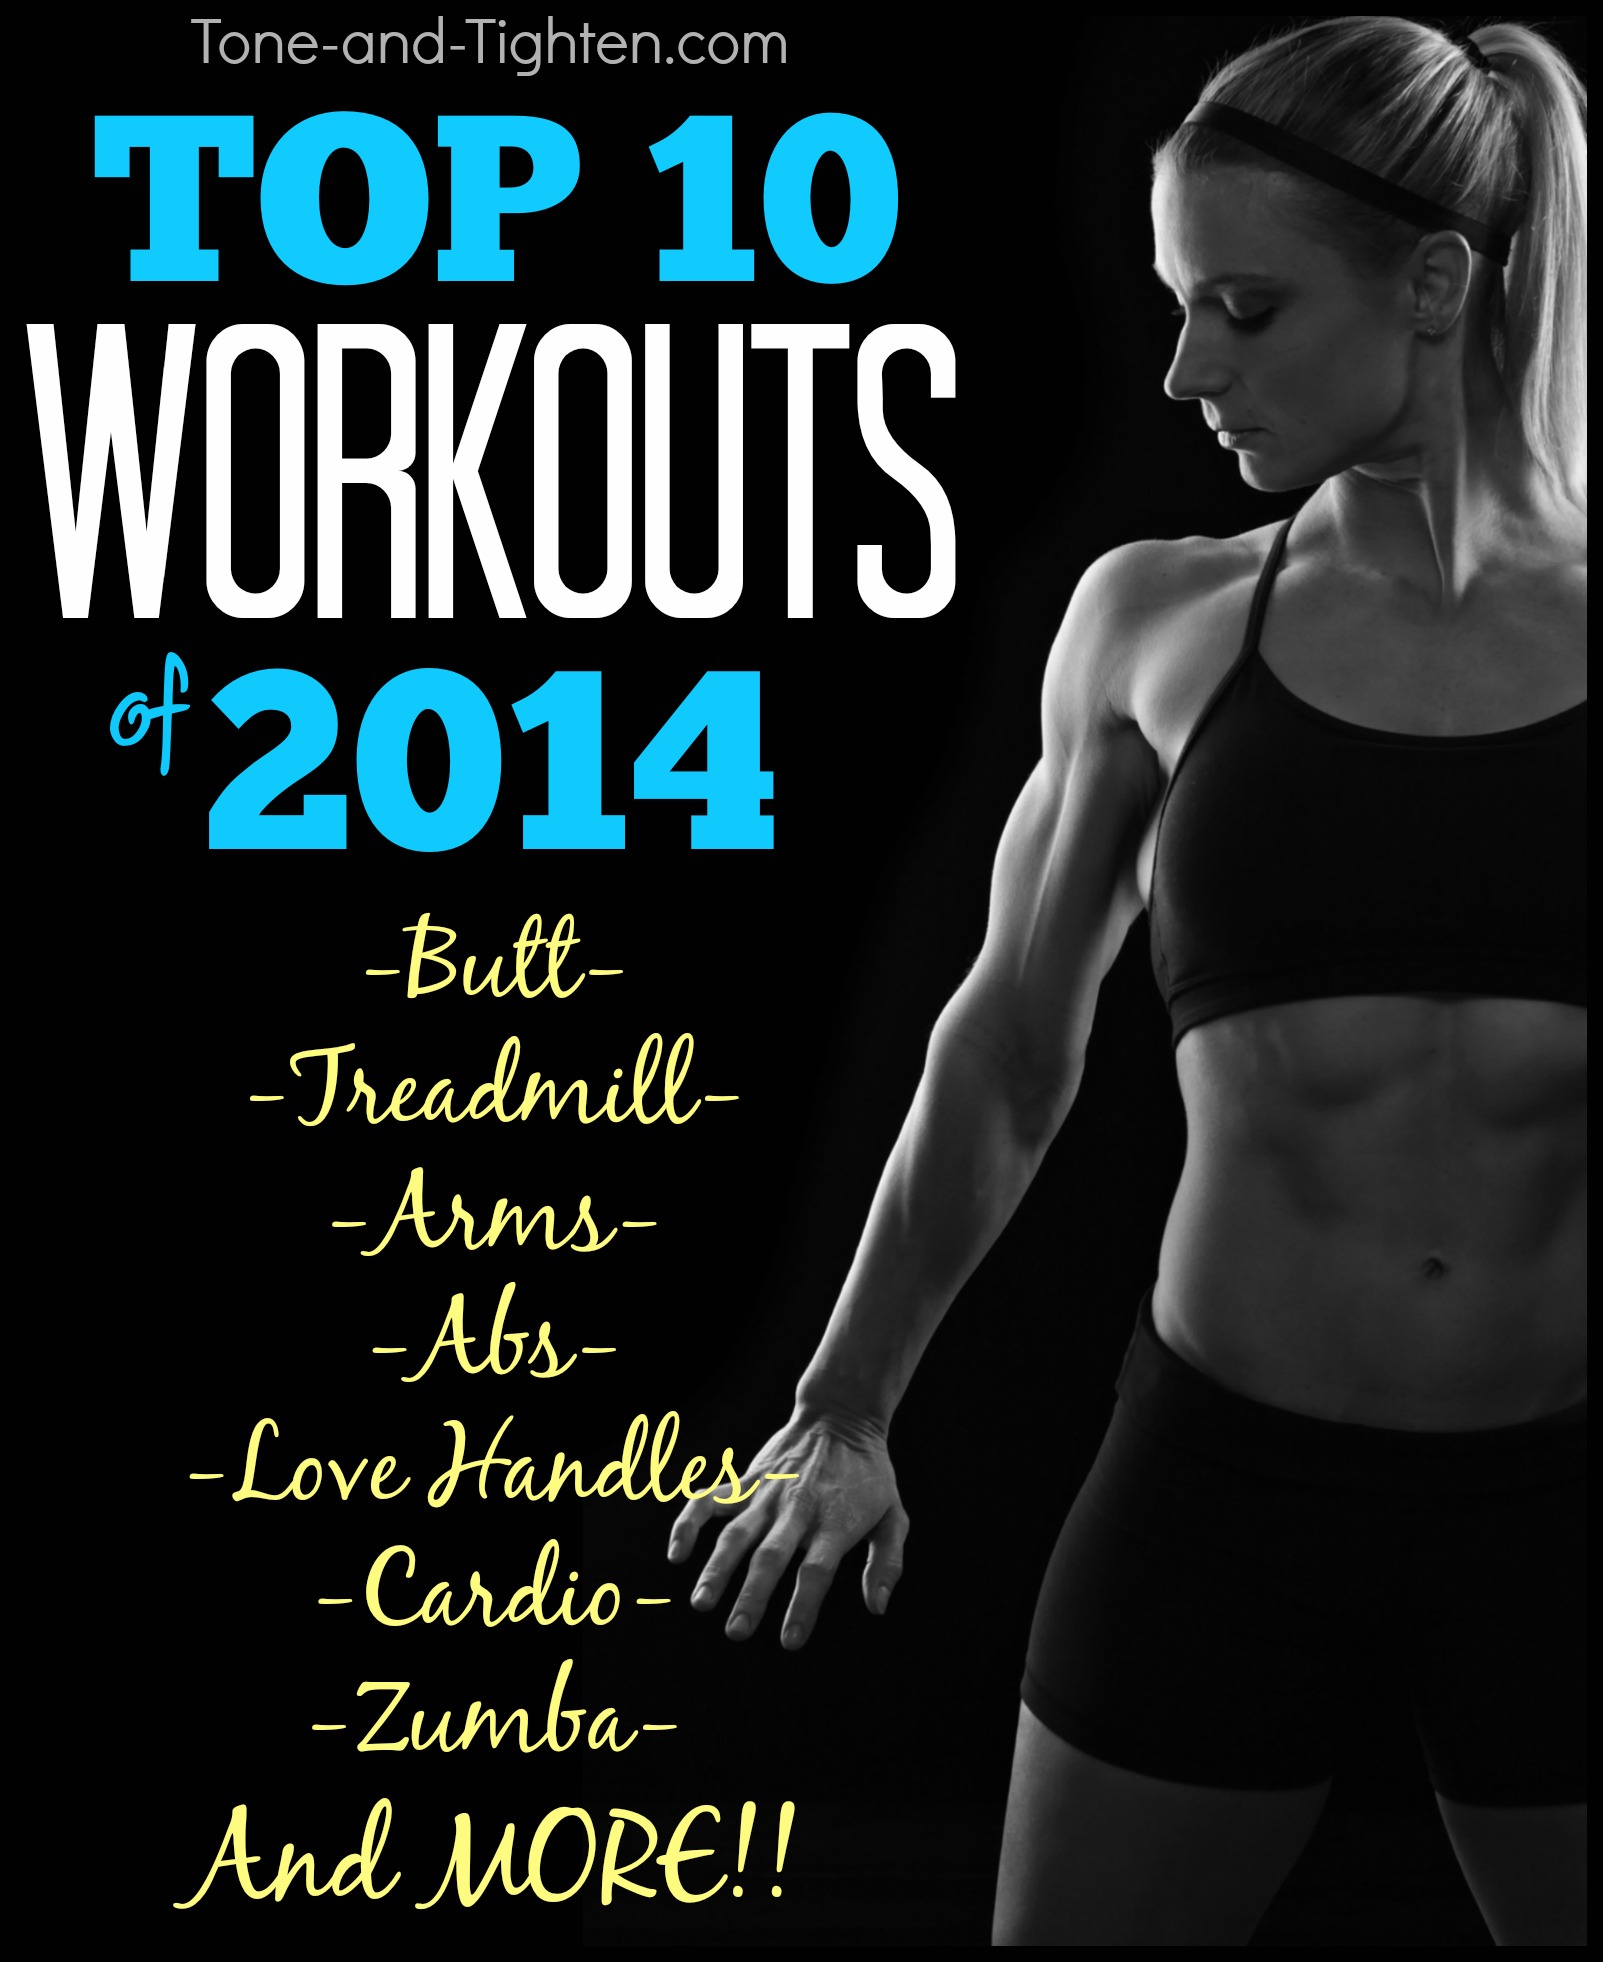 Tone and Tighten’s Top 10 Workouts of 2014